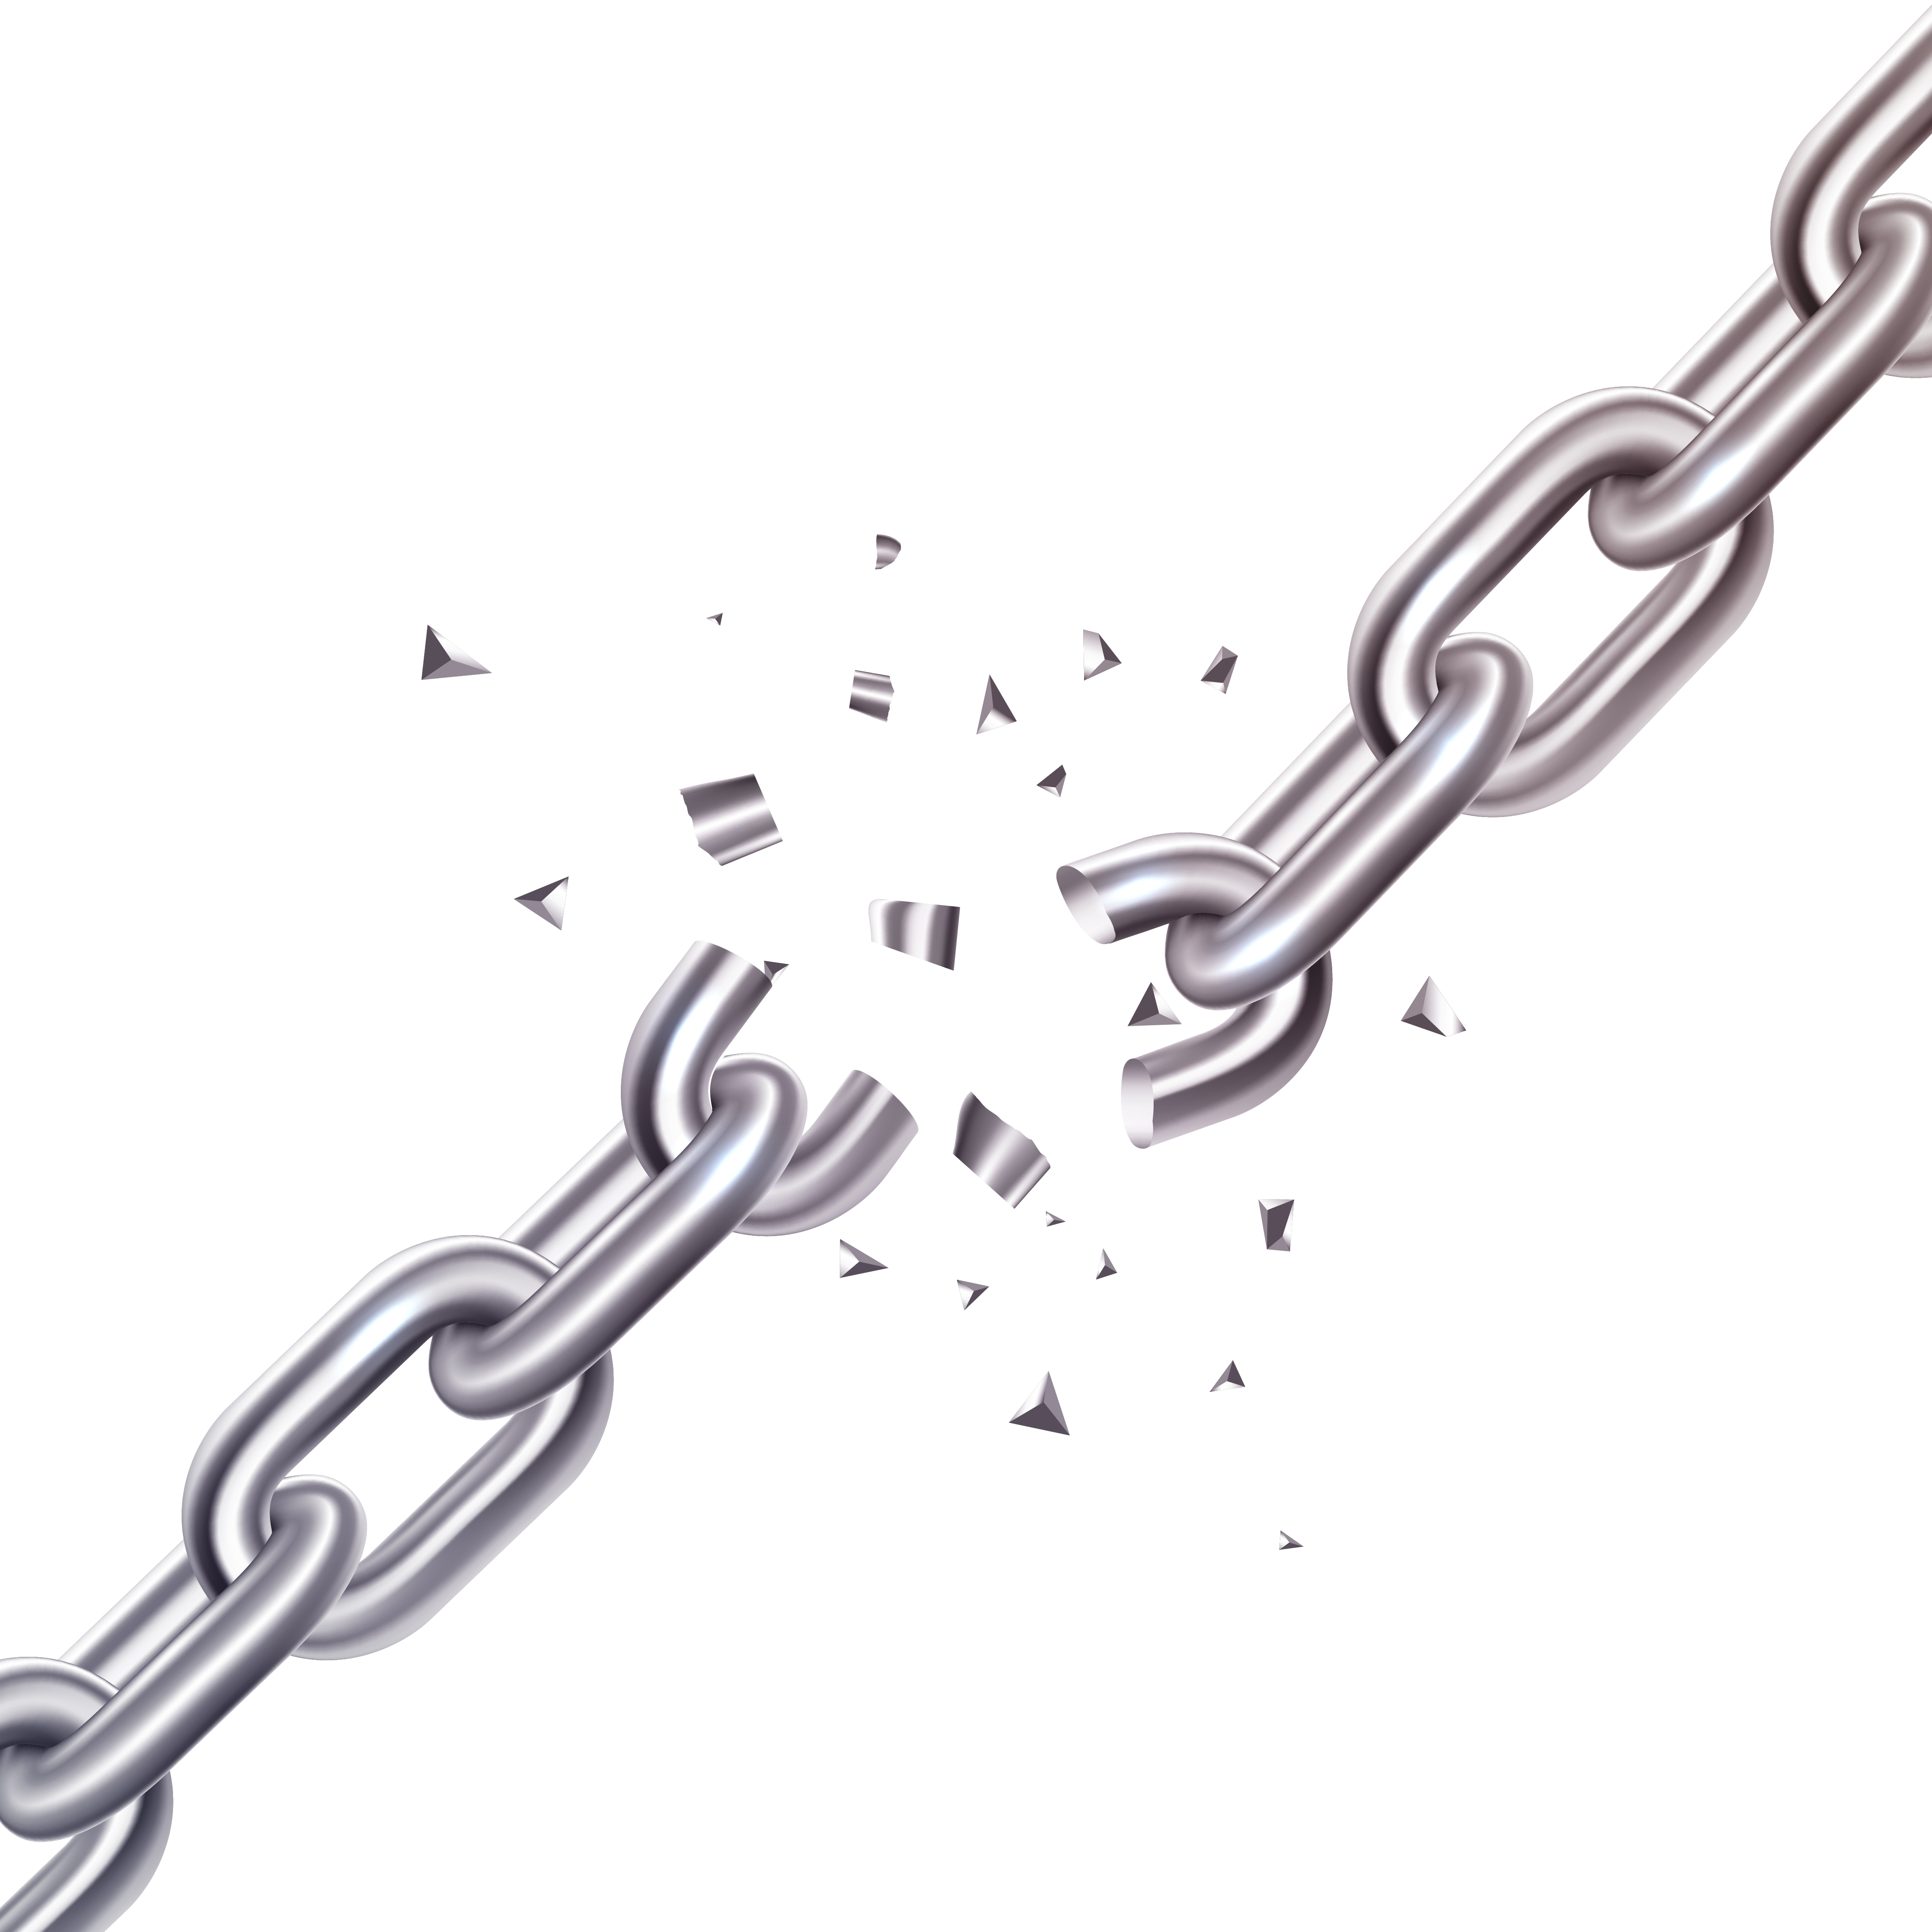 Keys to avoiding hotlinking and protecting your online resources